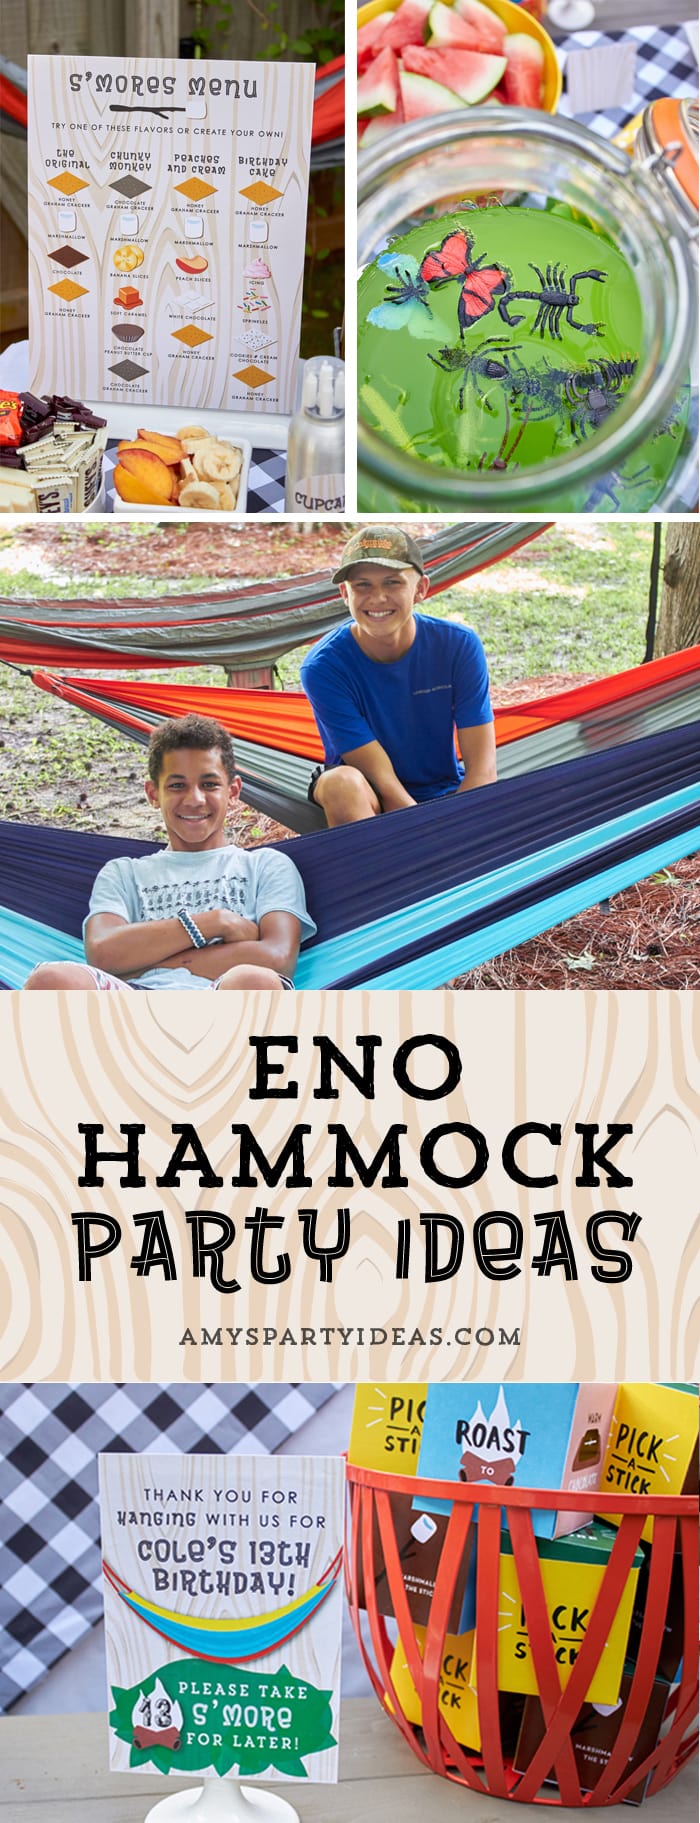 ENO Hammock Party Ideas from AmysPartyIdeas.com | Birthday Party Ideas for Tweens, Teens | Hang Out Party Ideas | Camping party ideas, portable s'mores, bug juice, s'mores menu, printable party supplies